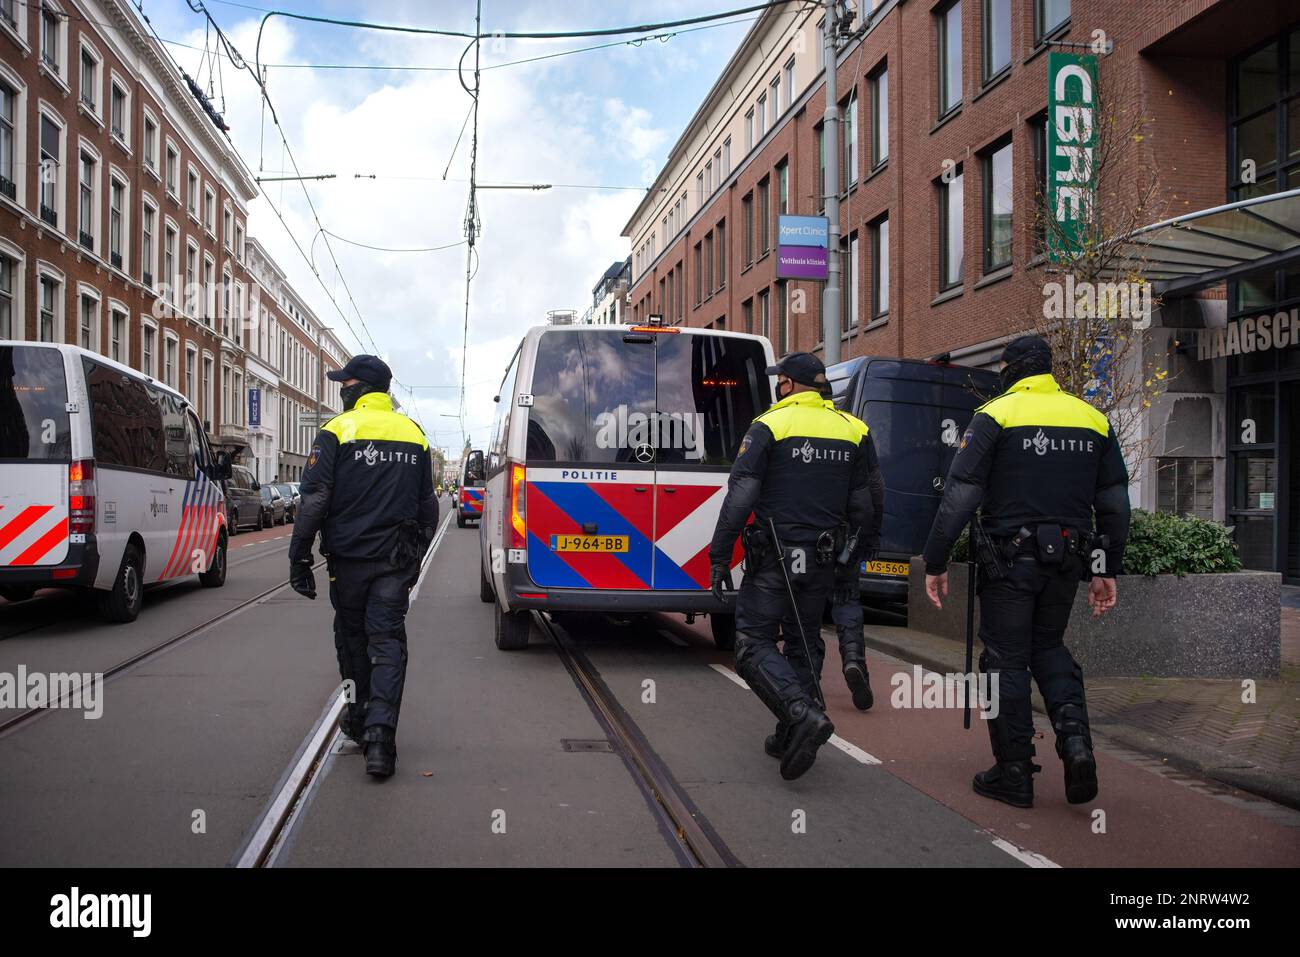 07 November 2021, Hague, Netherlands, Malieveld, Protest against measures for preventing COVID-19 infections, police forces on duty, protecting people Stock Photo